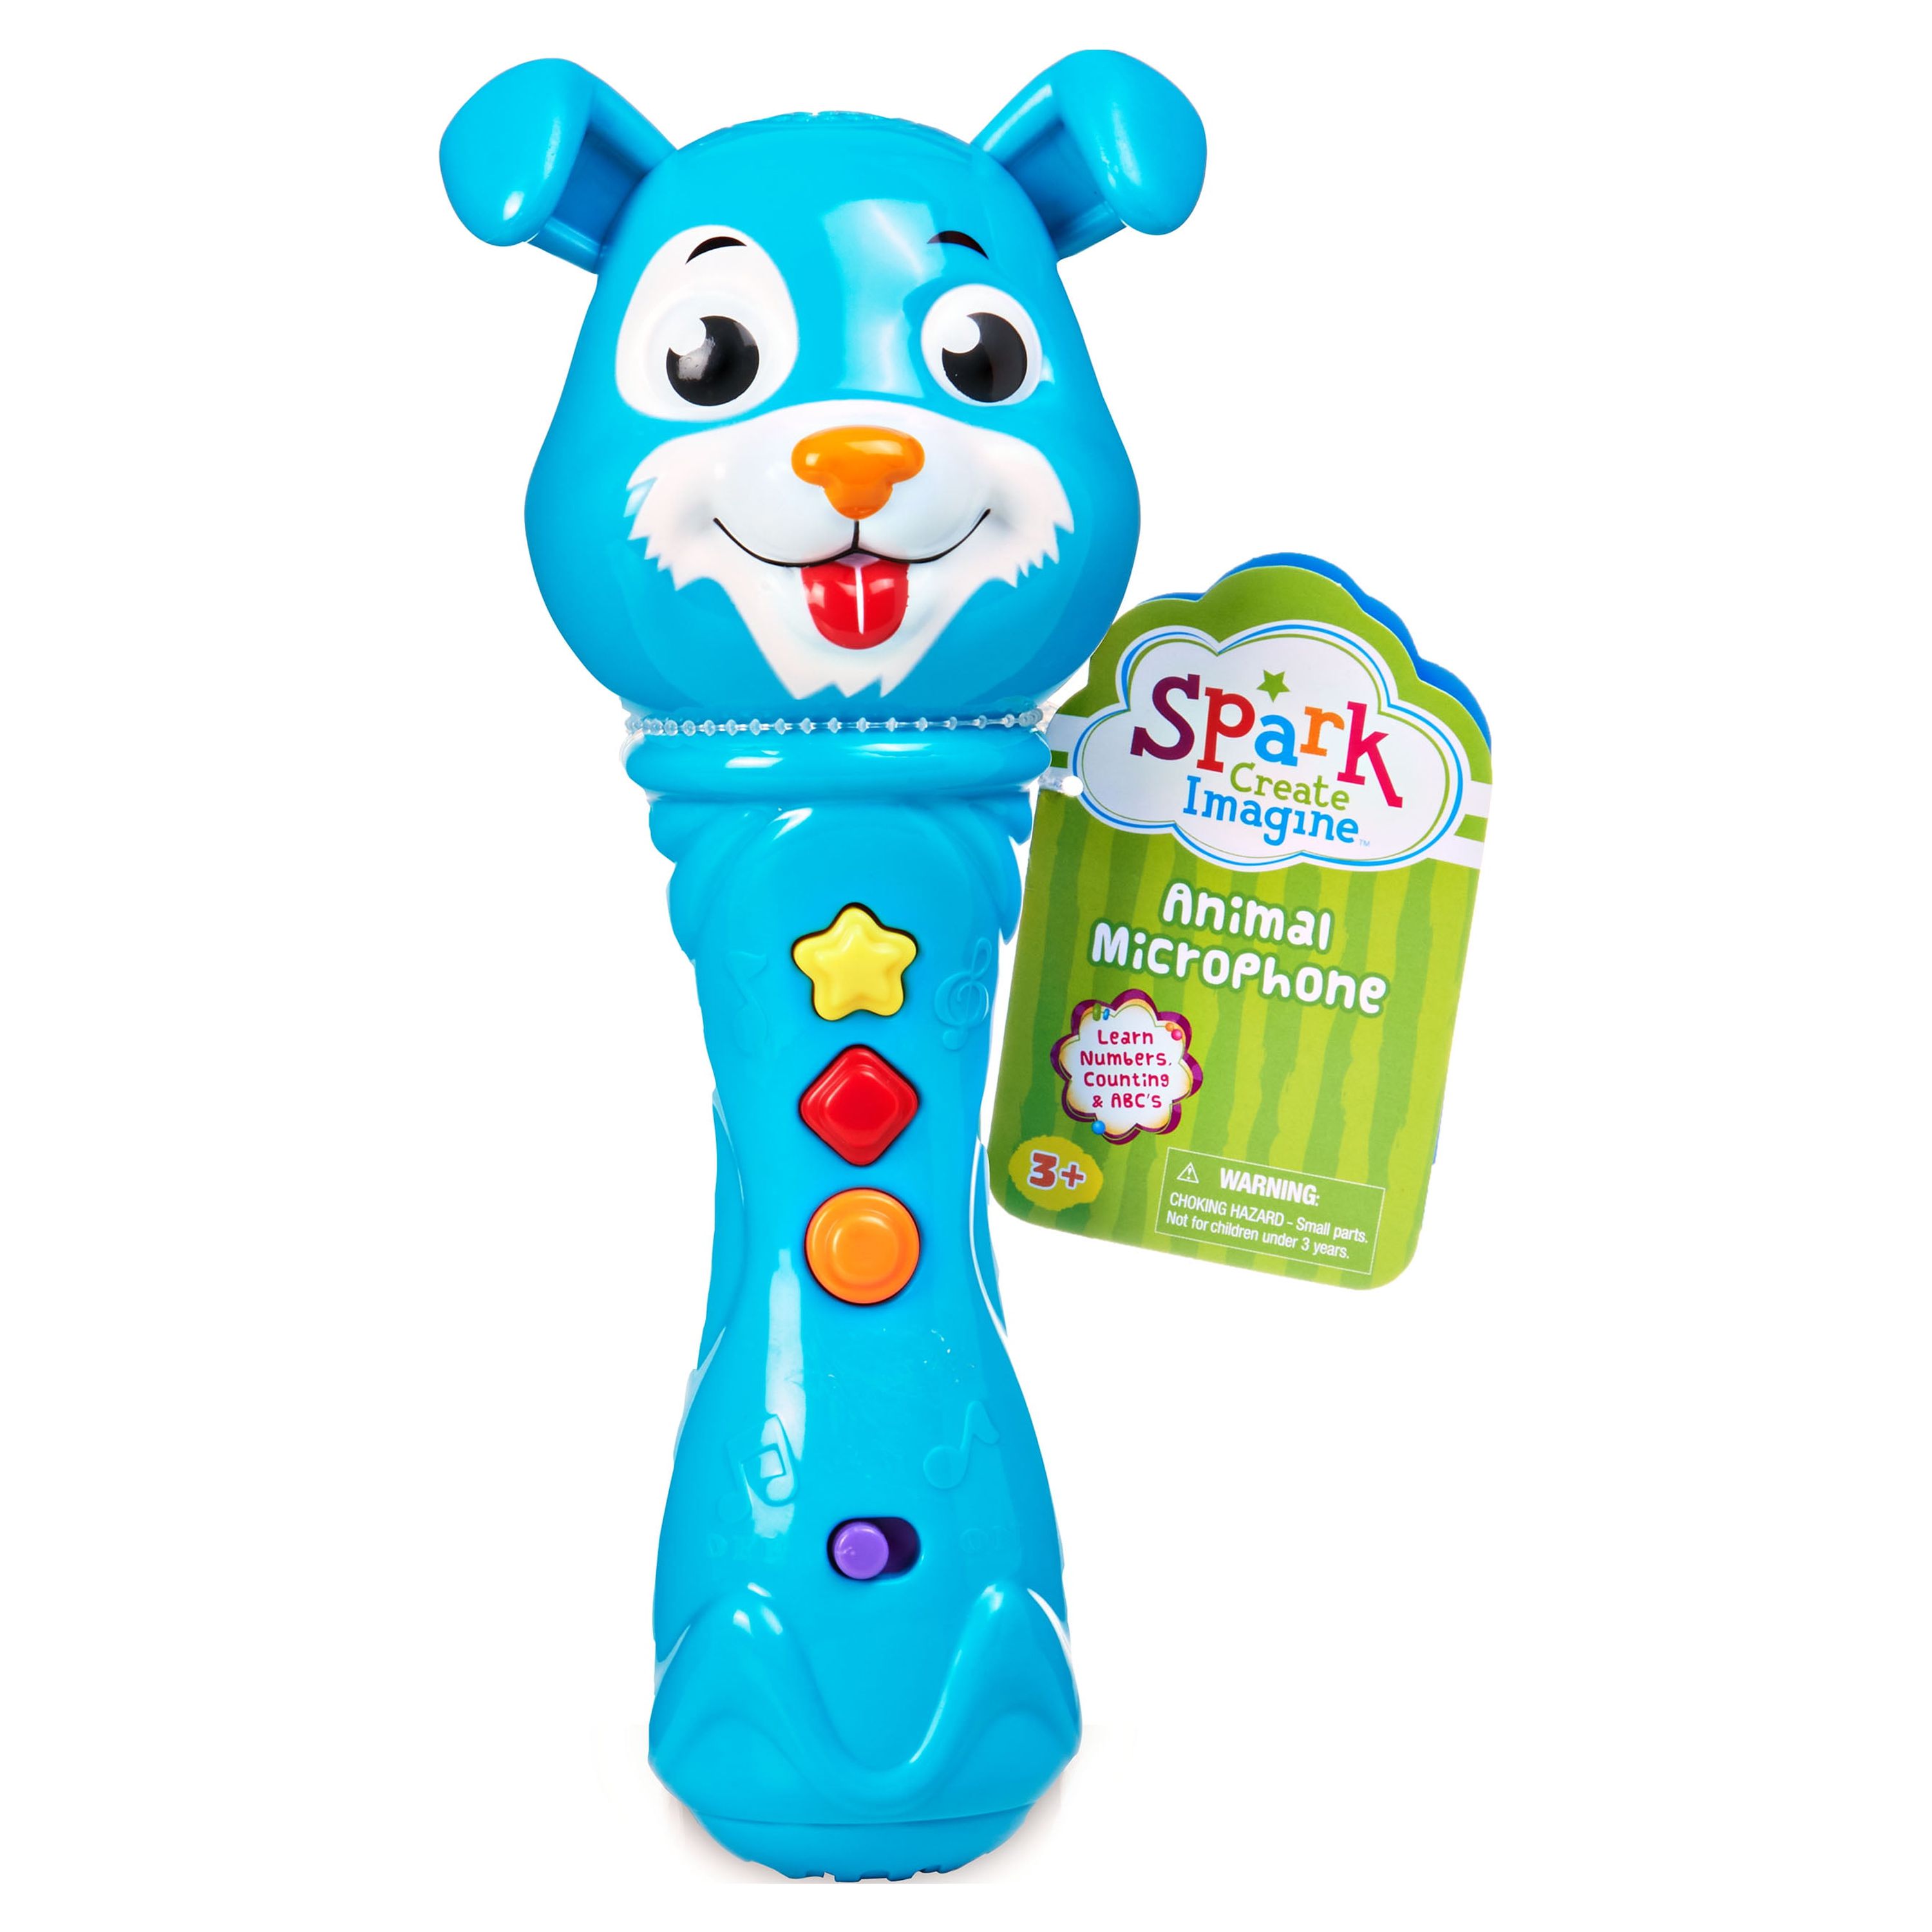 Spark Create Imagine, Interactive Learning Microphone Toy, 3 Modes, Unisex, Blue, 3 Years up - image 4 of 7